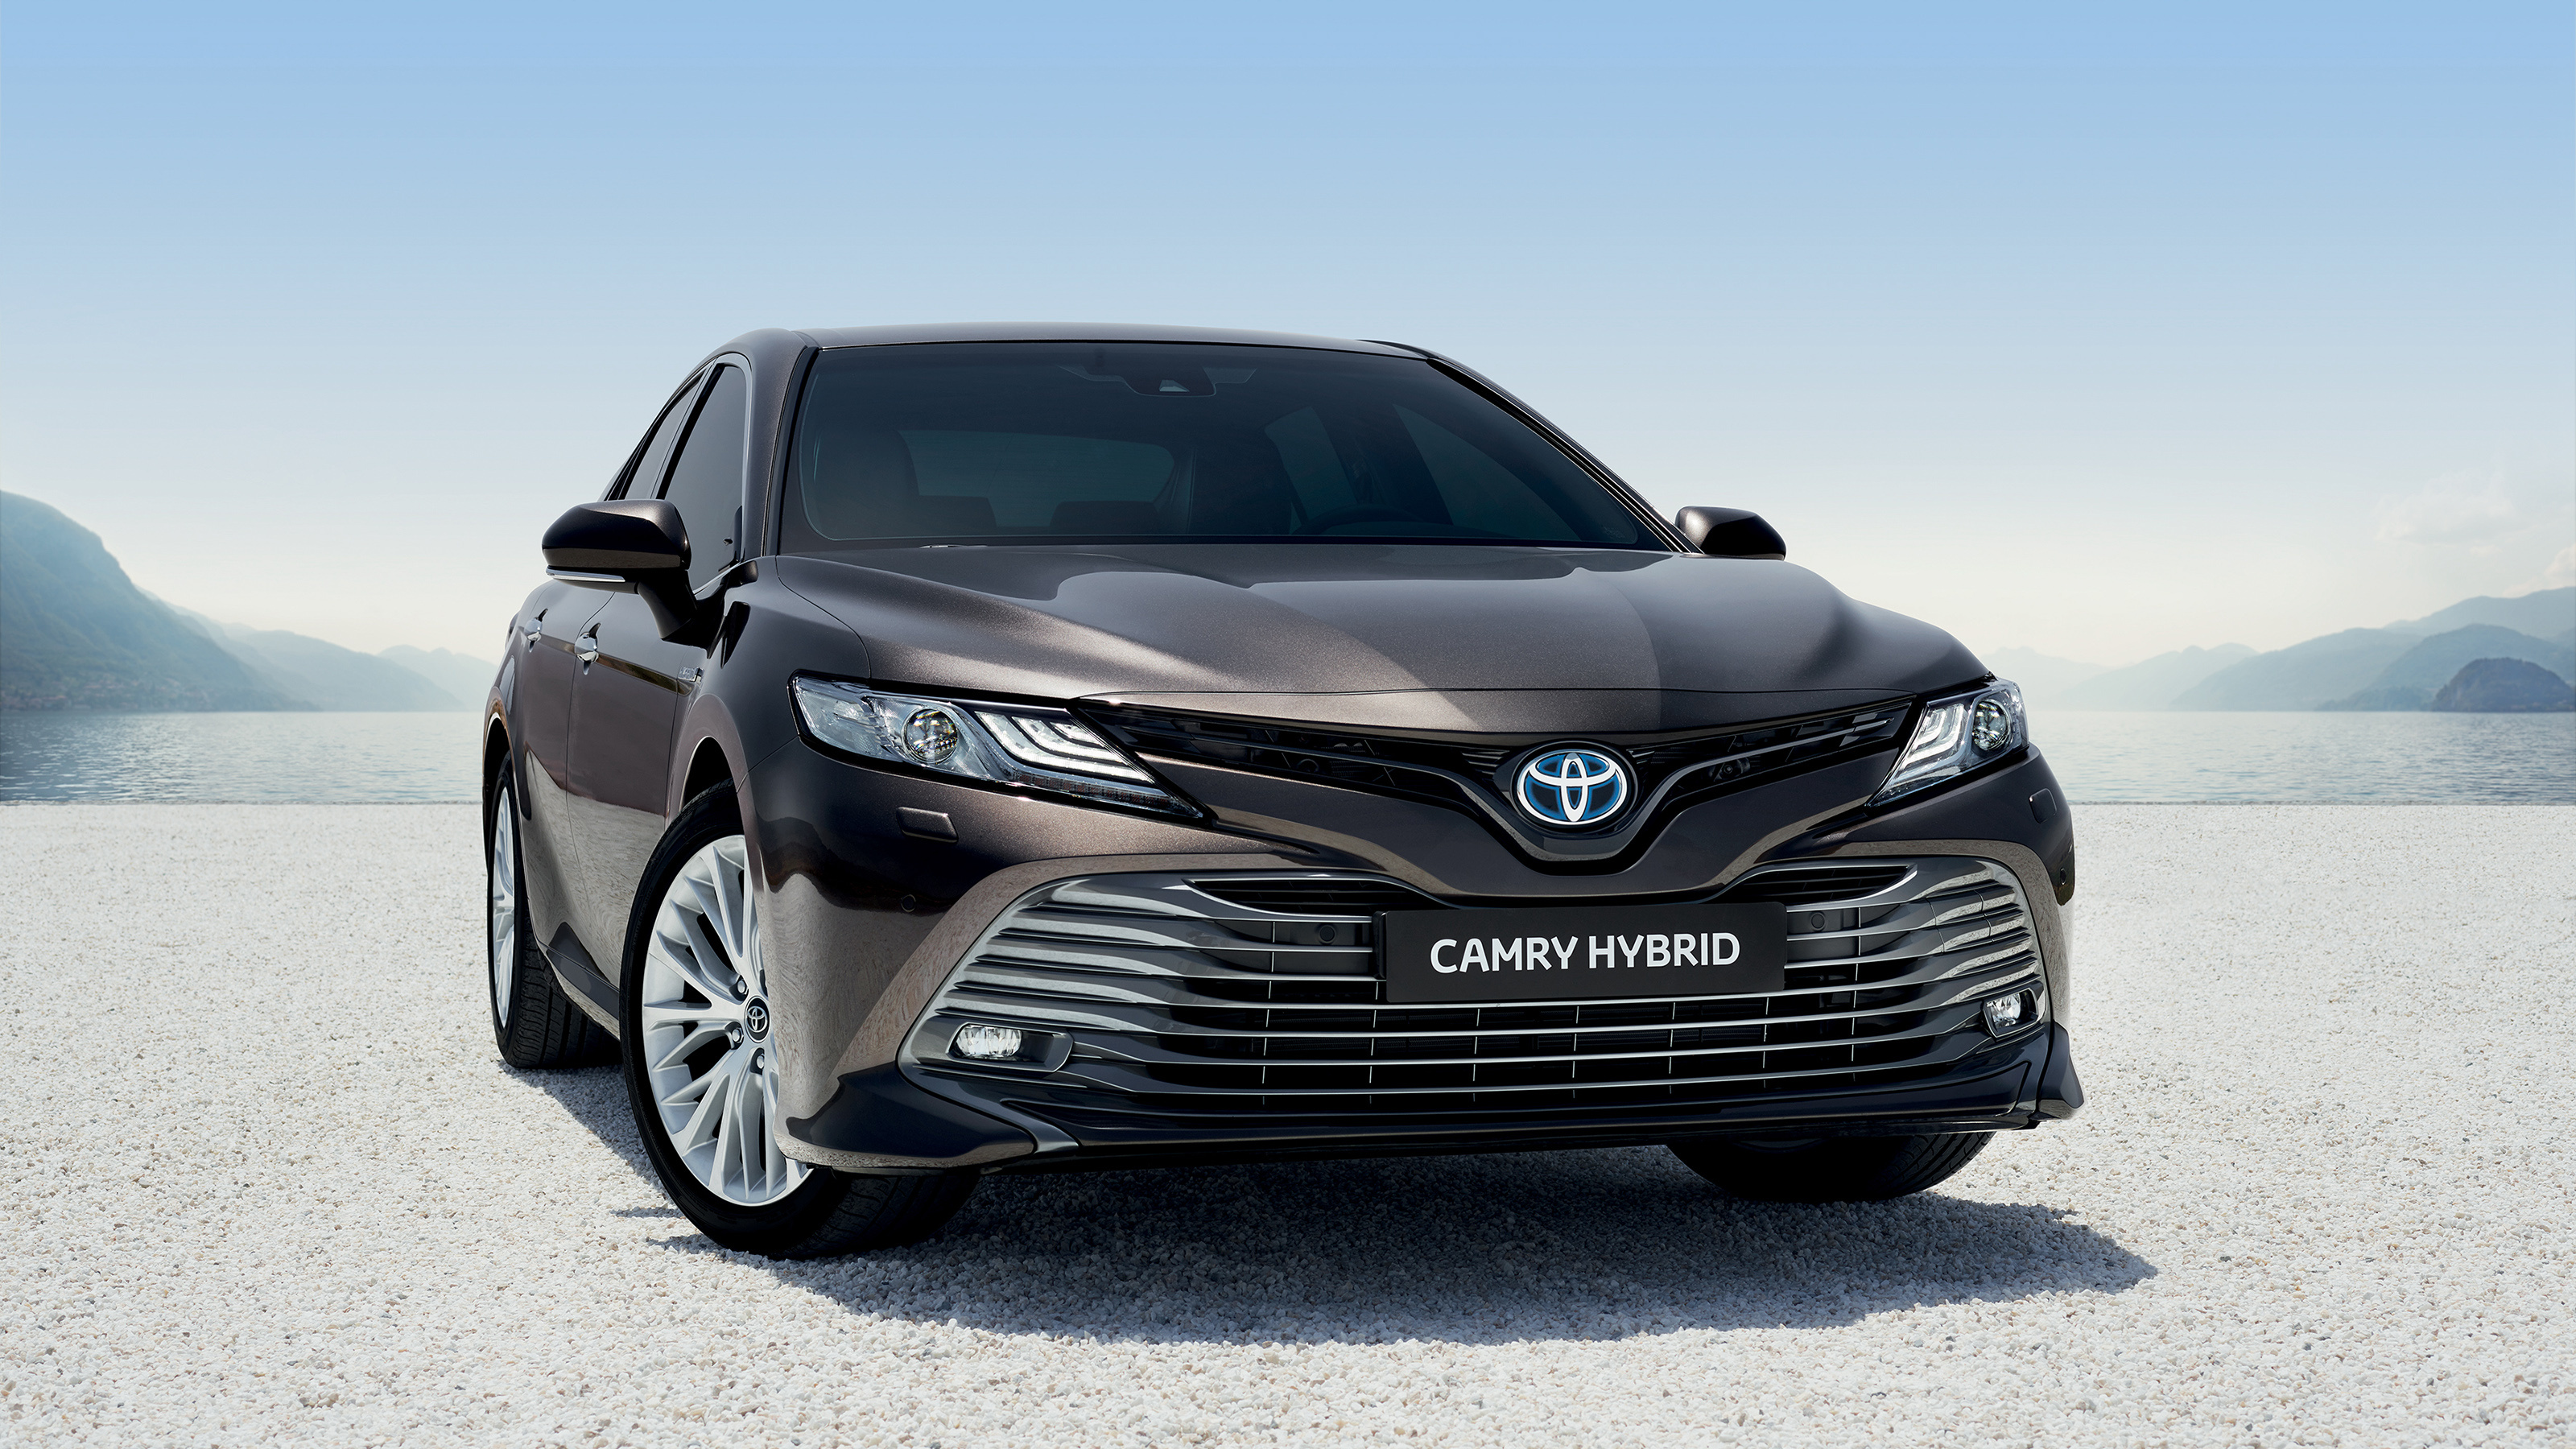 Toyota Camry Auto, Toyota Camry 2019 wallpapers, Camry backgrounds, 3200x1800 HD Desktop